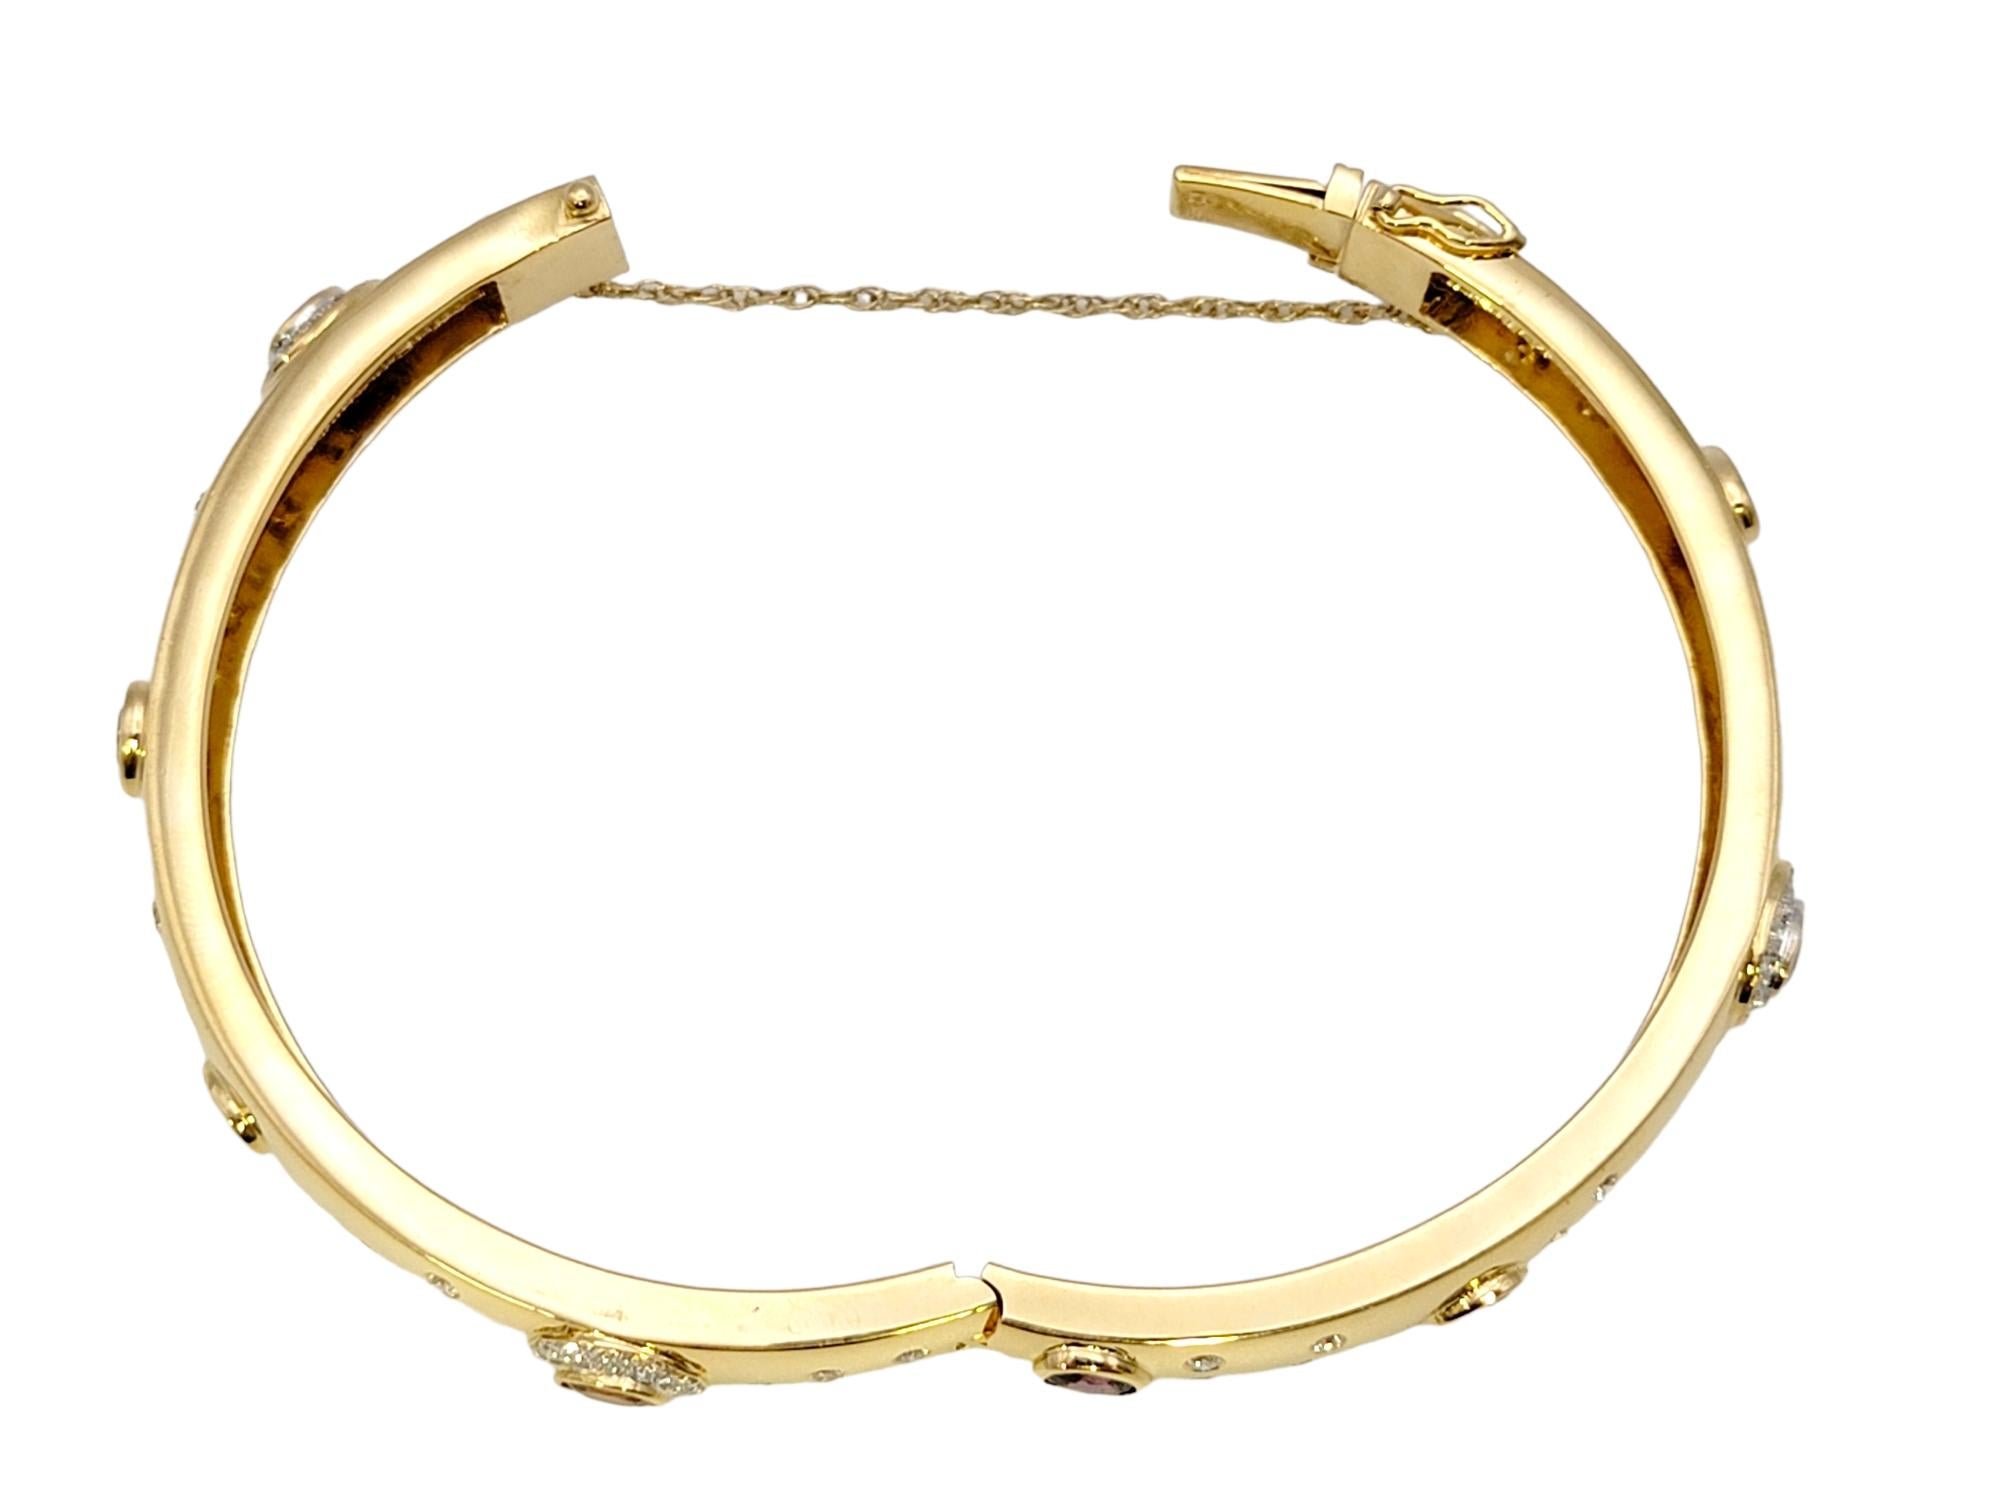 5.62 Carat Total Multi-Colored Sapphire and Diamond Yellow Gold Bangle Bracelet For Sale 2